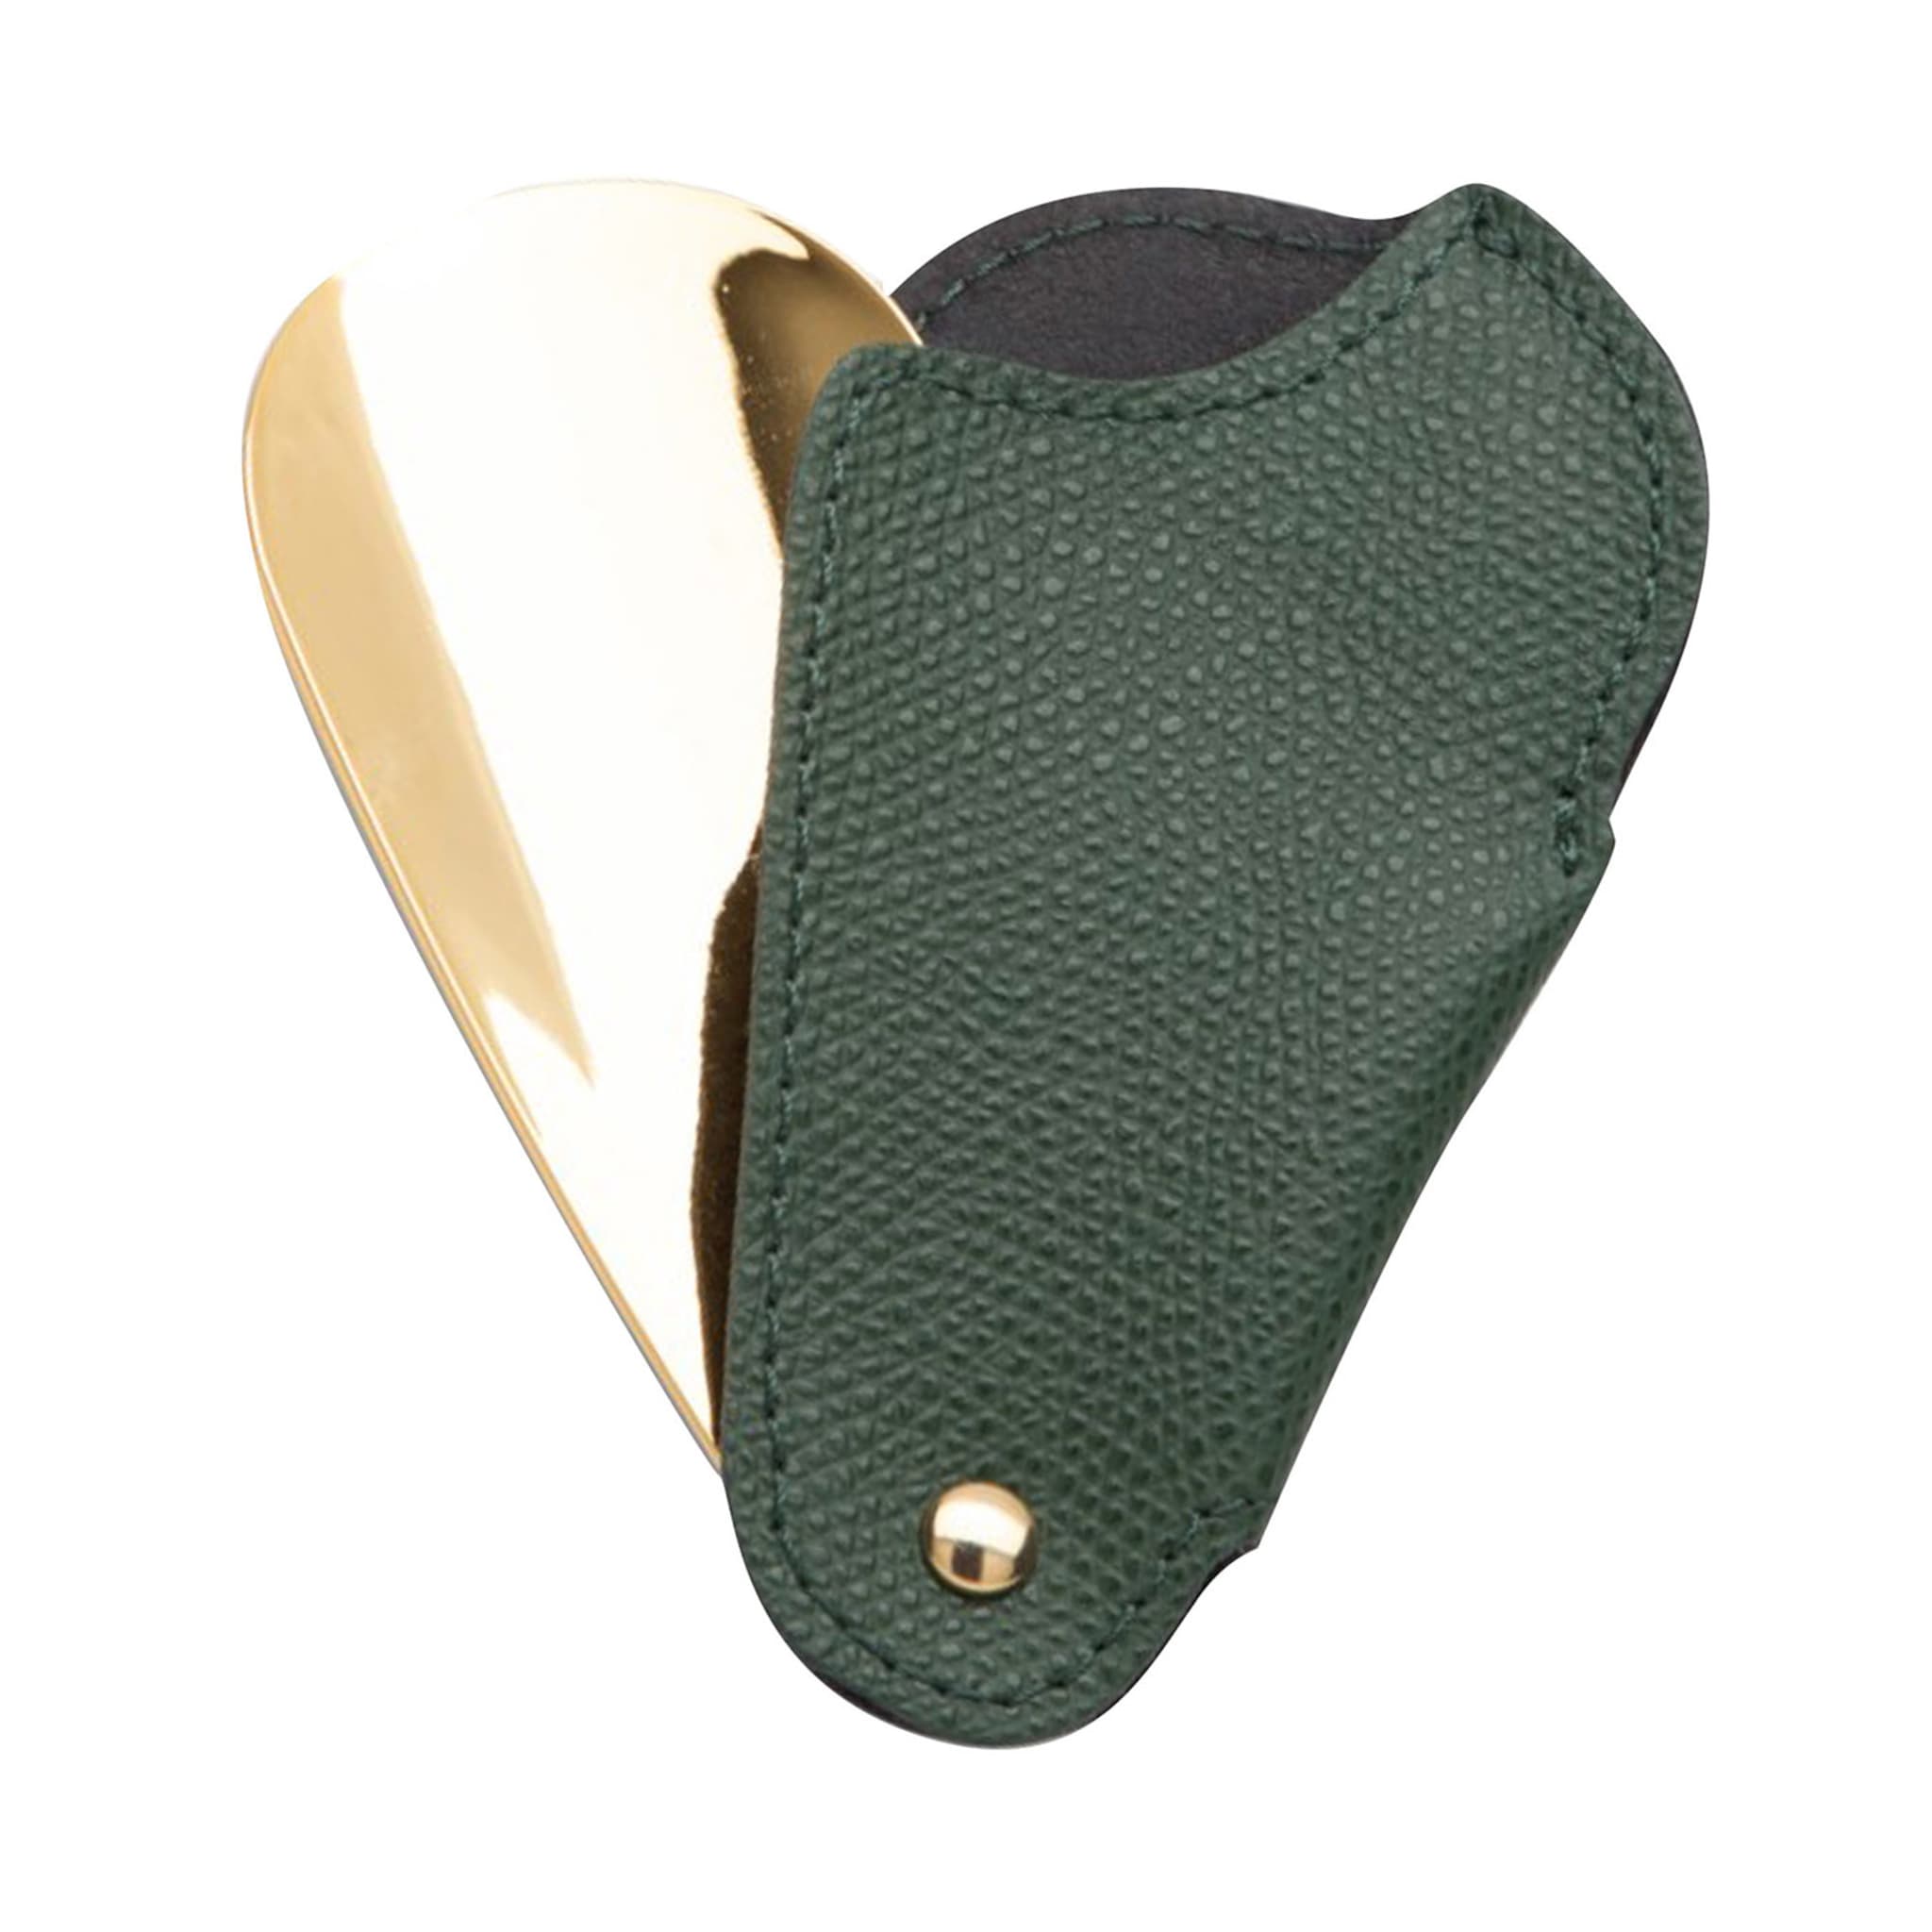 Army-Green & Gold Hammered Leather Travel Shoe Horn  - Main view